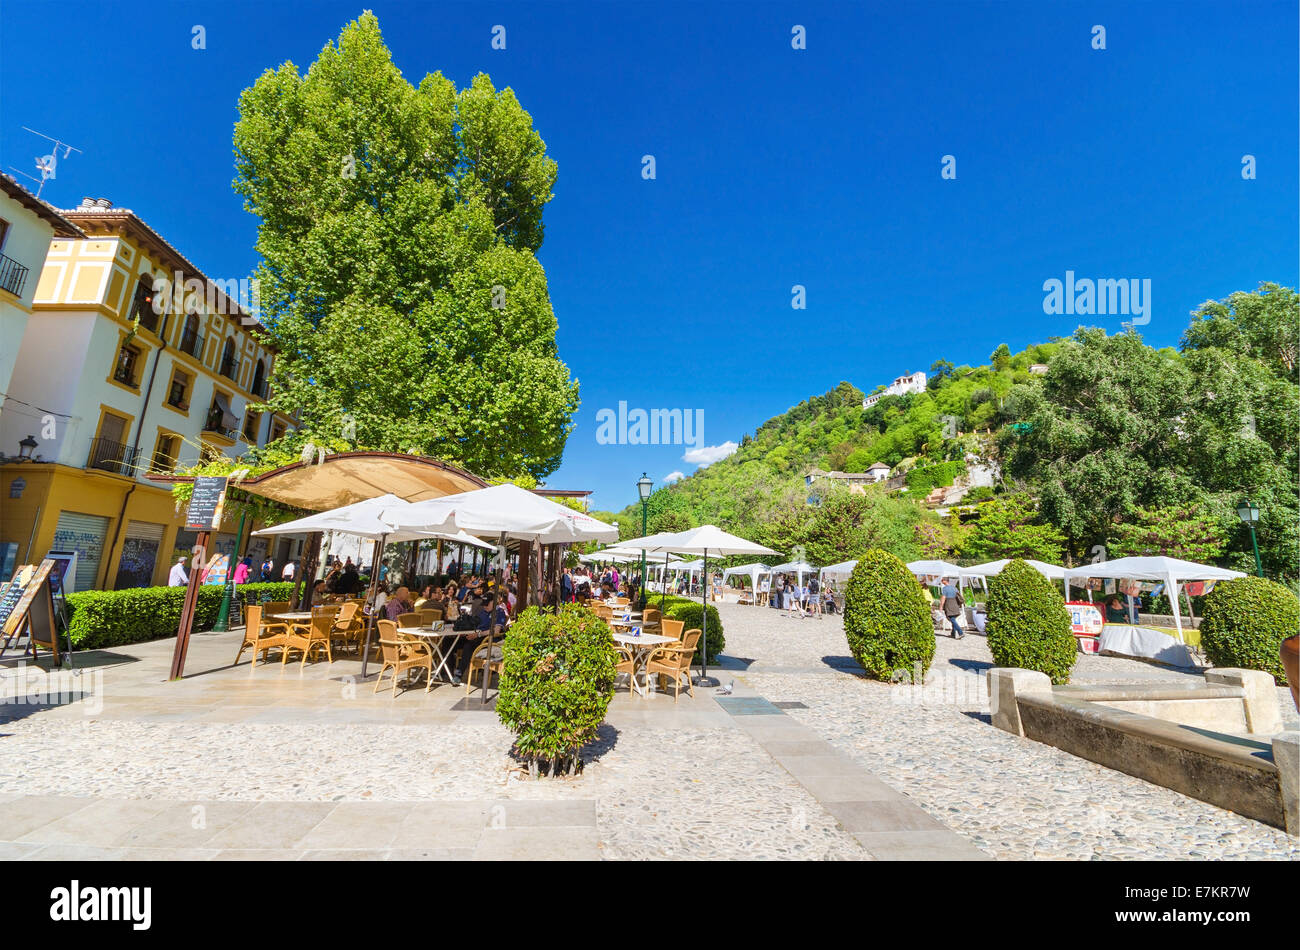 GRANADA, SPAIN - APRIL 26: Los tristes Boulevard on April 26, 2014 in Granada, Spain. Some tourist relaxing in a terrace, in the Stock Photo